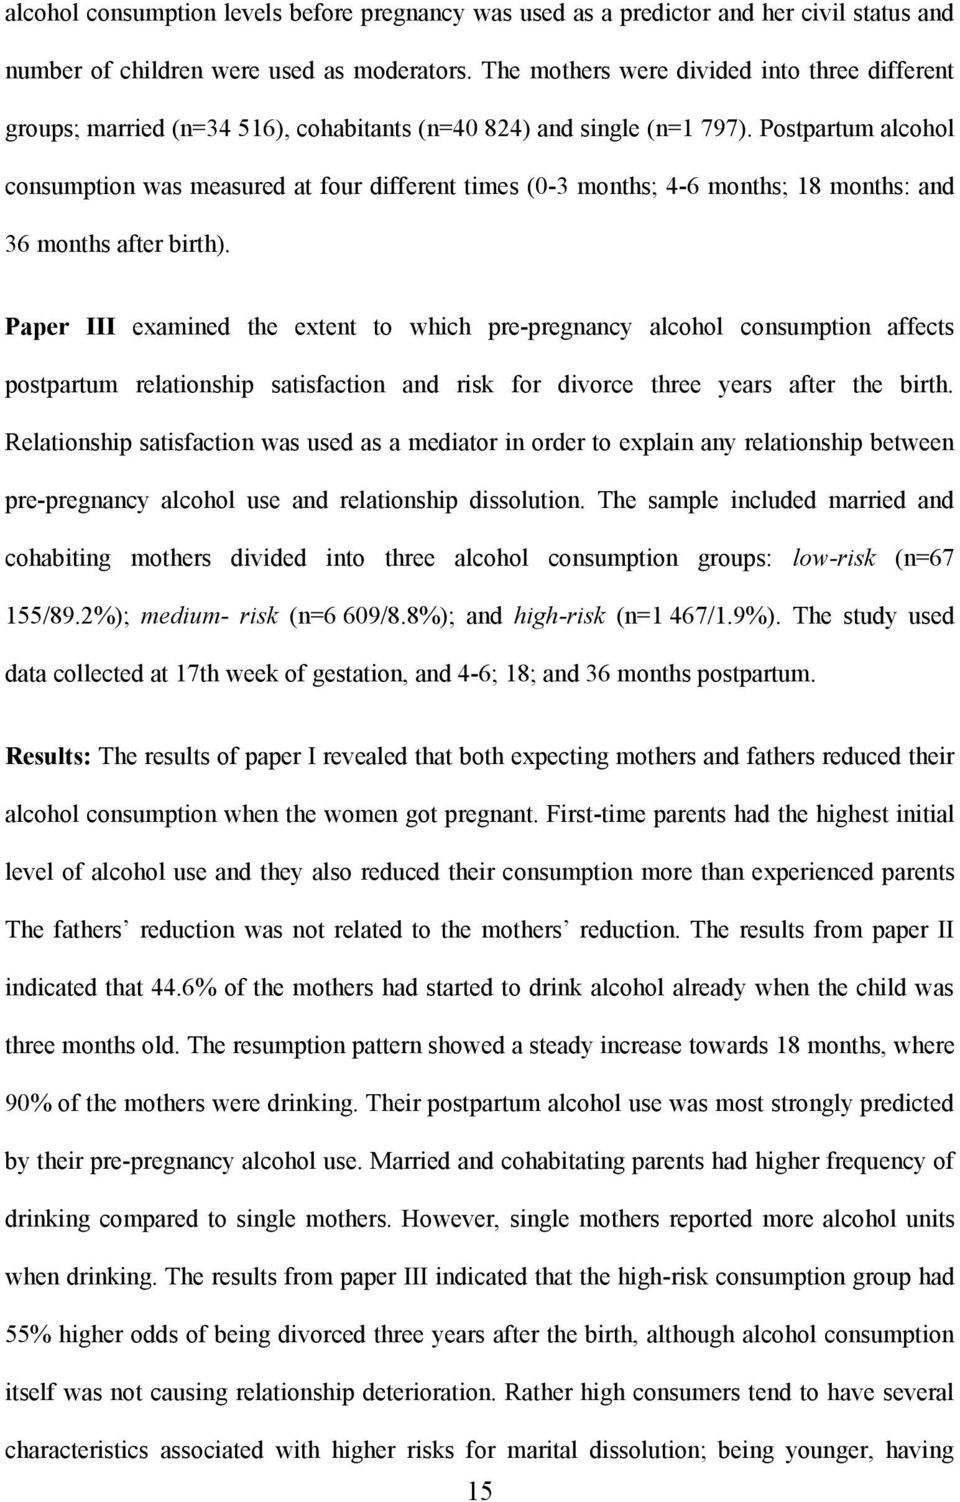 Postpartum alcohol consumption was measured at four different times (0-3 months; 4-6 months; 18 months: and 36 months after birth).